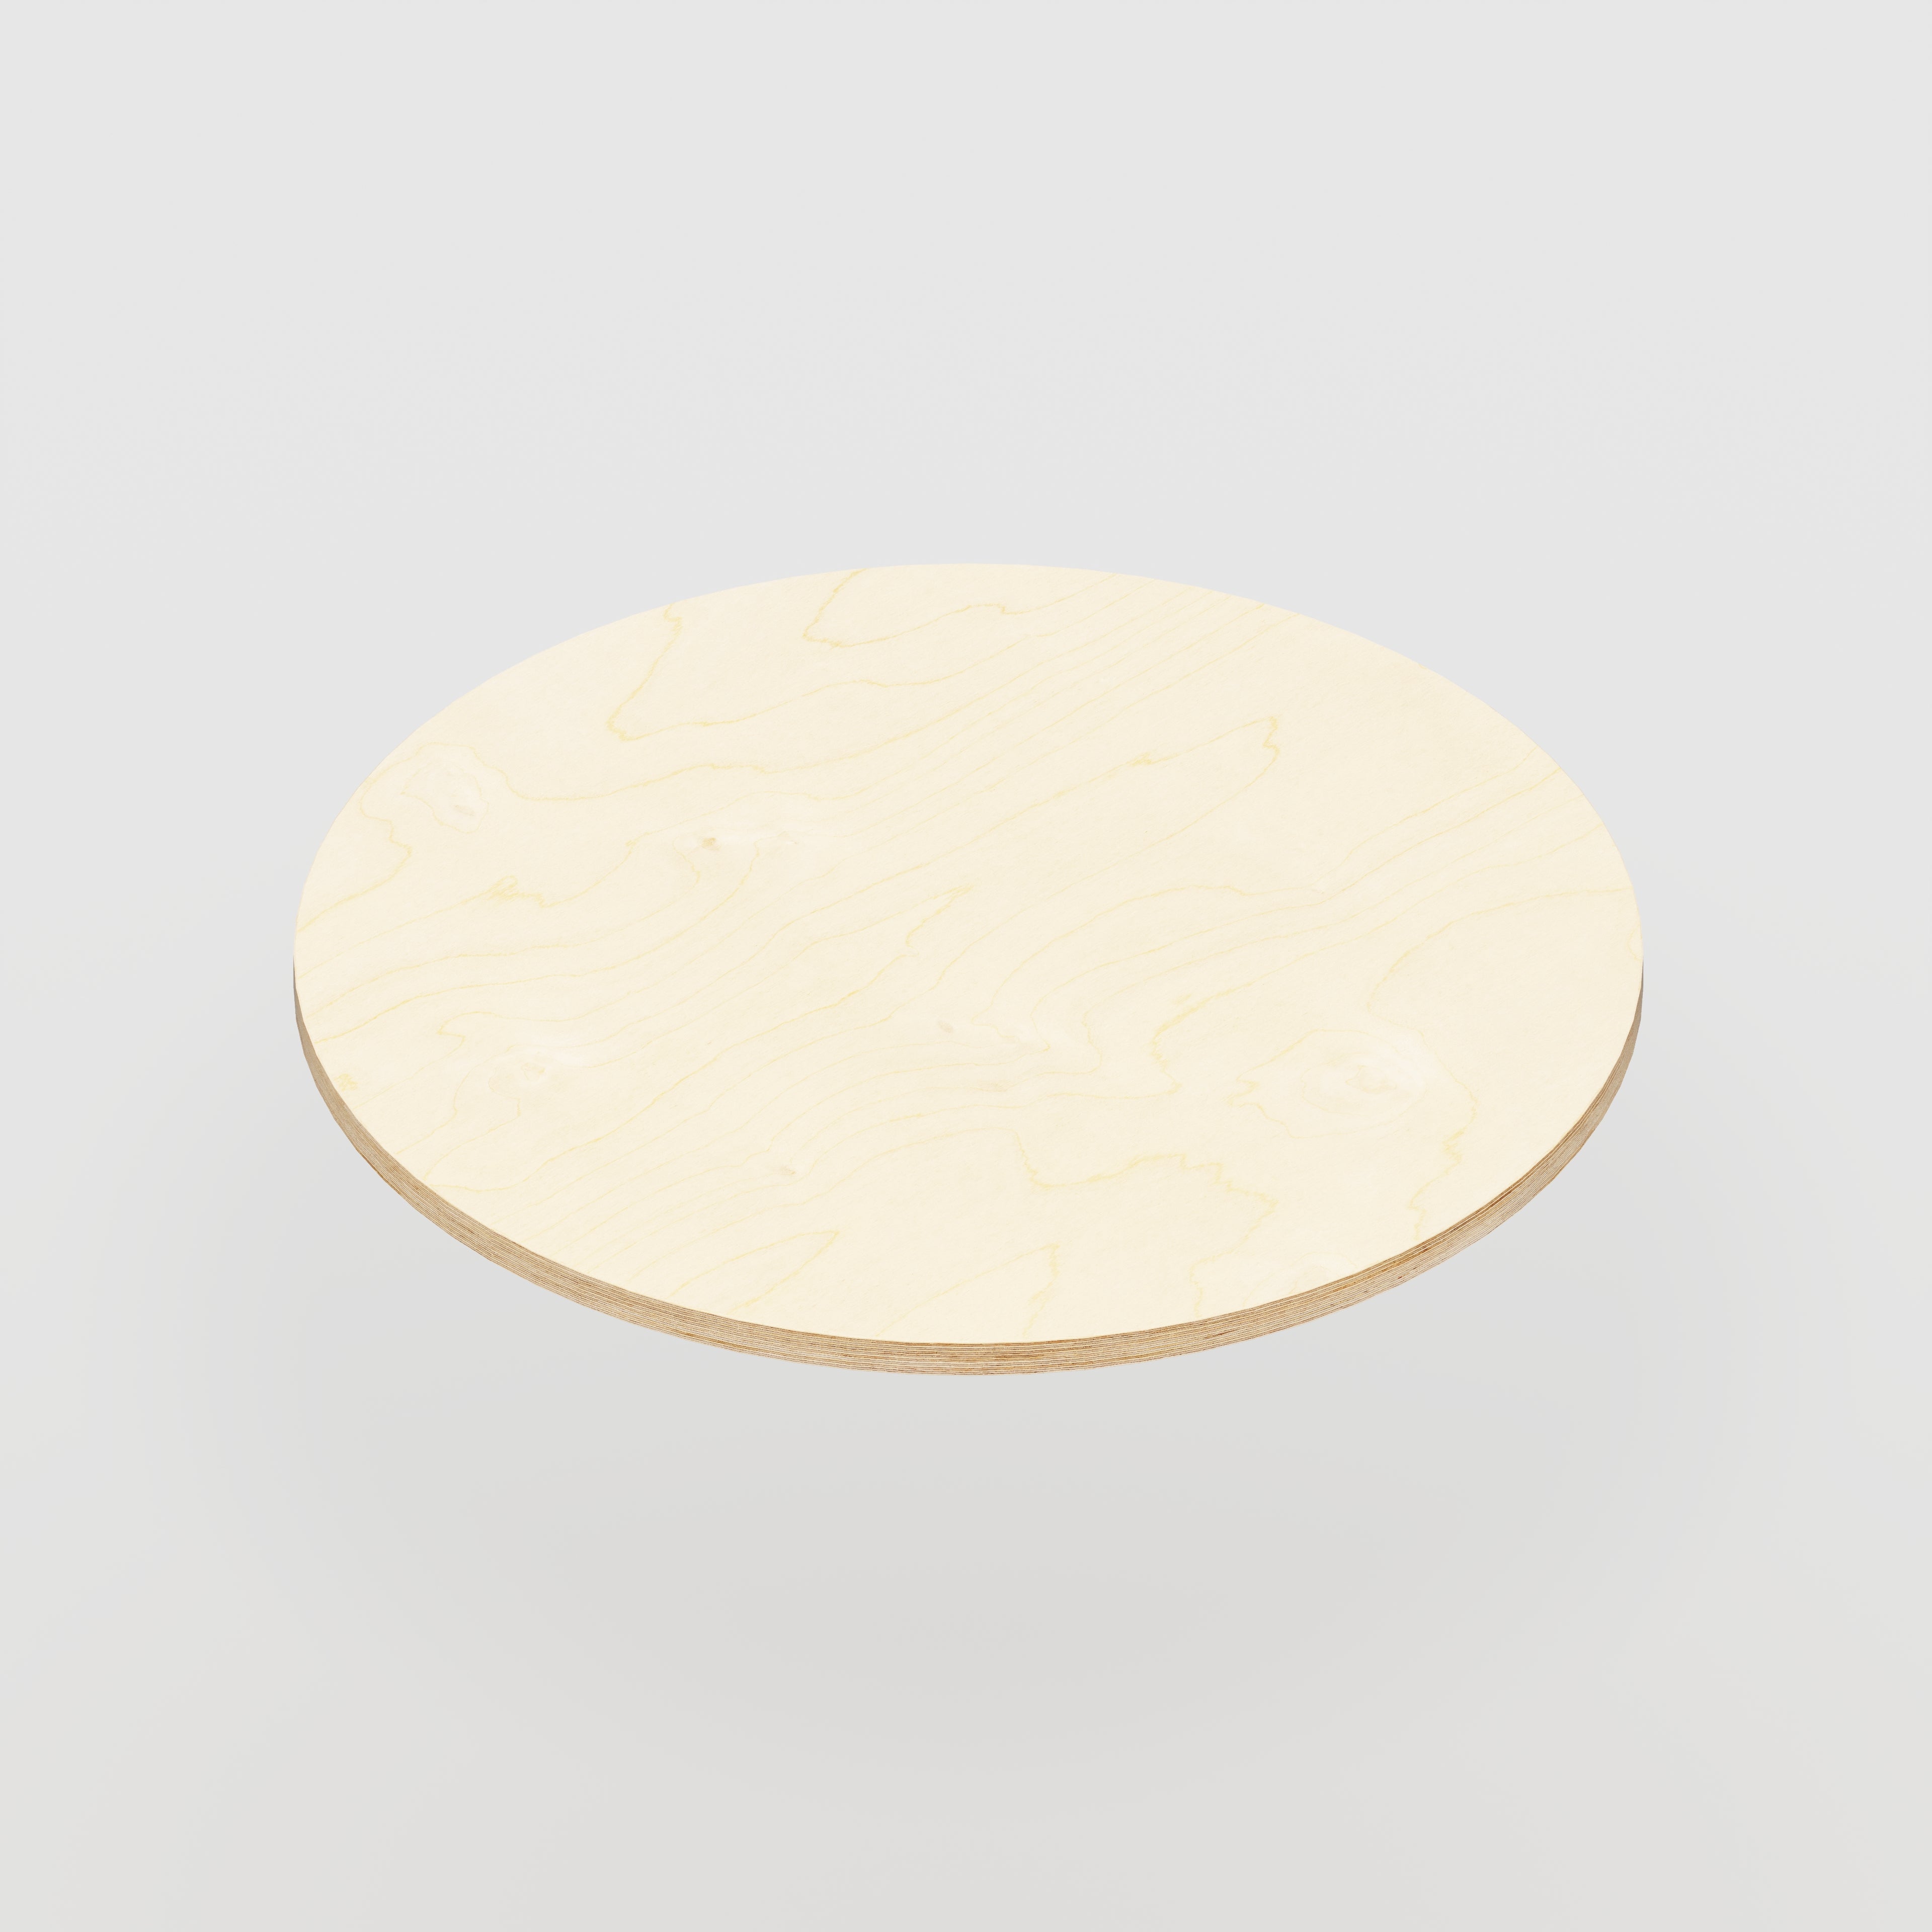 Plywood Round Tabletop - Plywood Birch - 500(dia) - 24mm